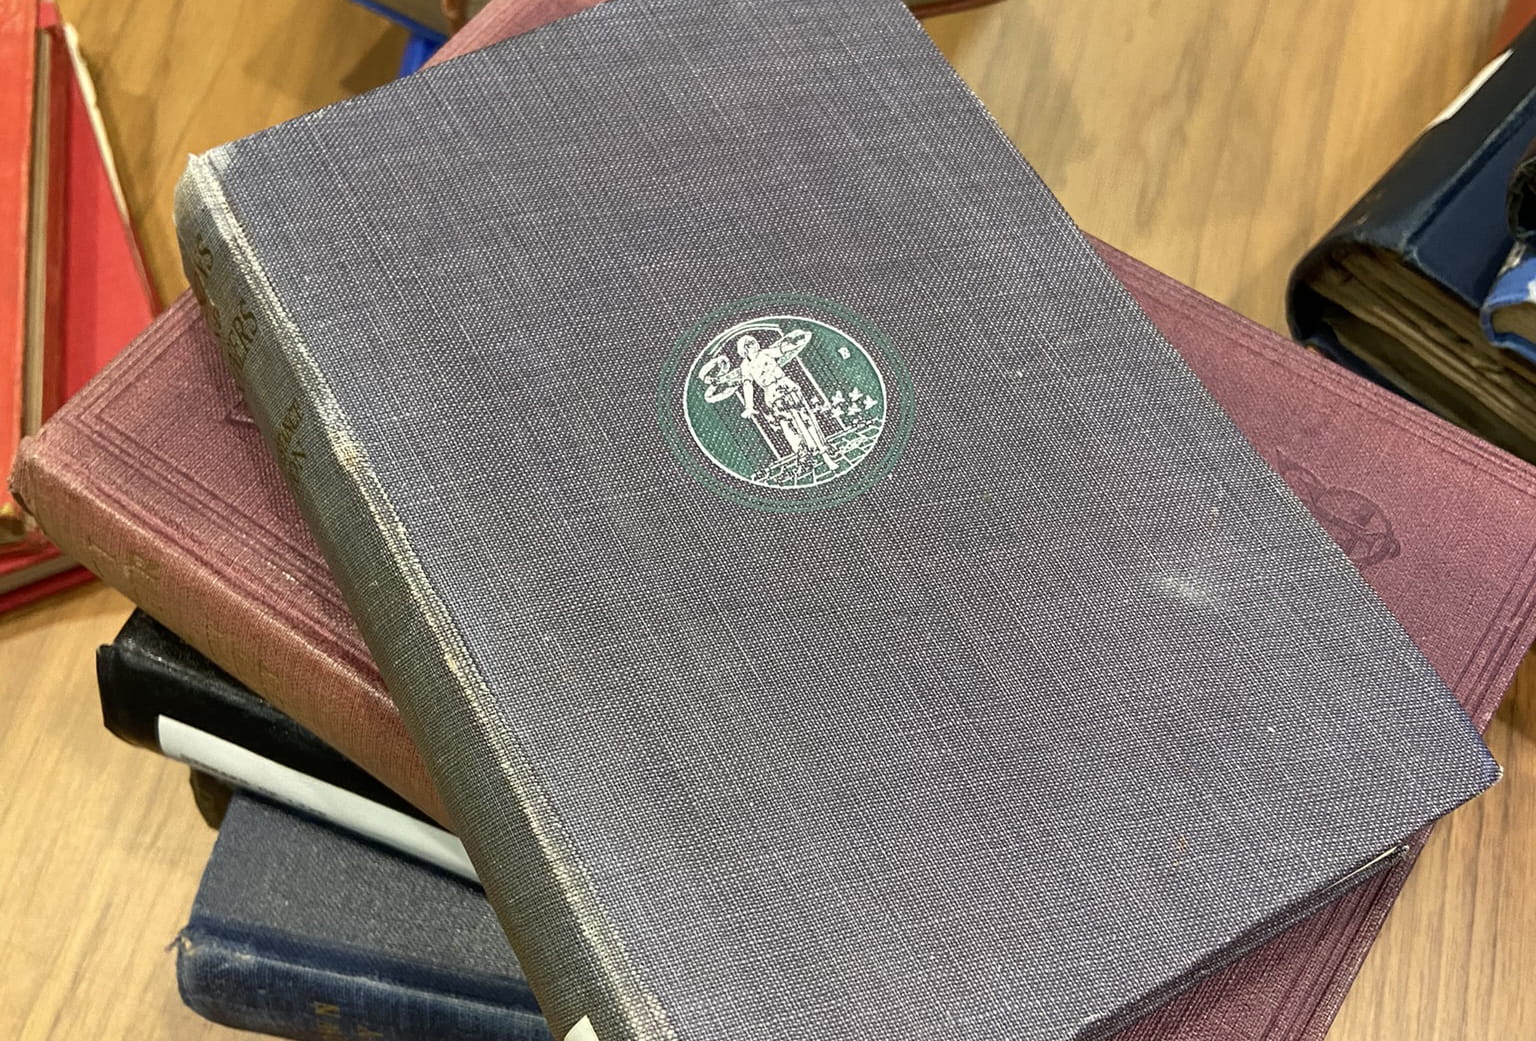 Women's Suffrage books from the University of Essex Library's Special Collections